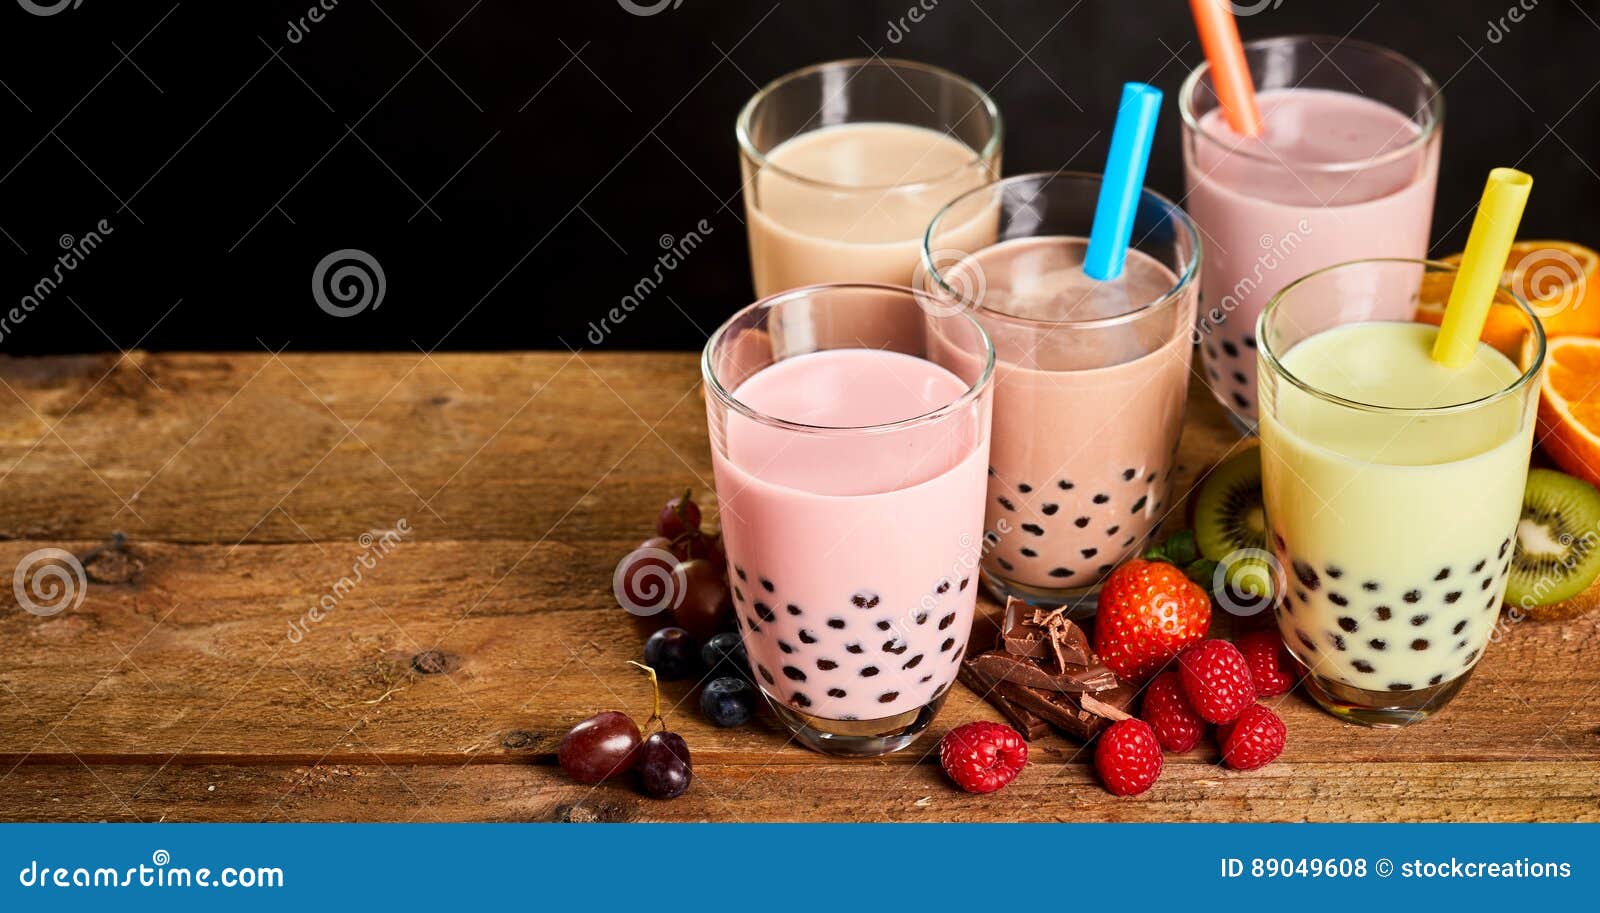 Download 1 336 Fresh Fruit Bubble Tea Photos Free Royalty Free Stock Photos From Dreamstime Yellowimages Mockups